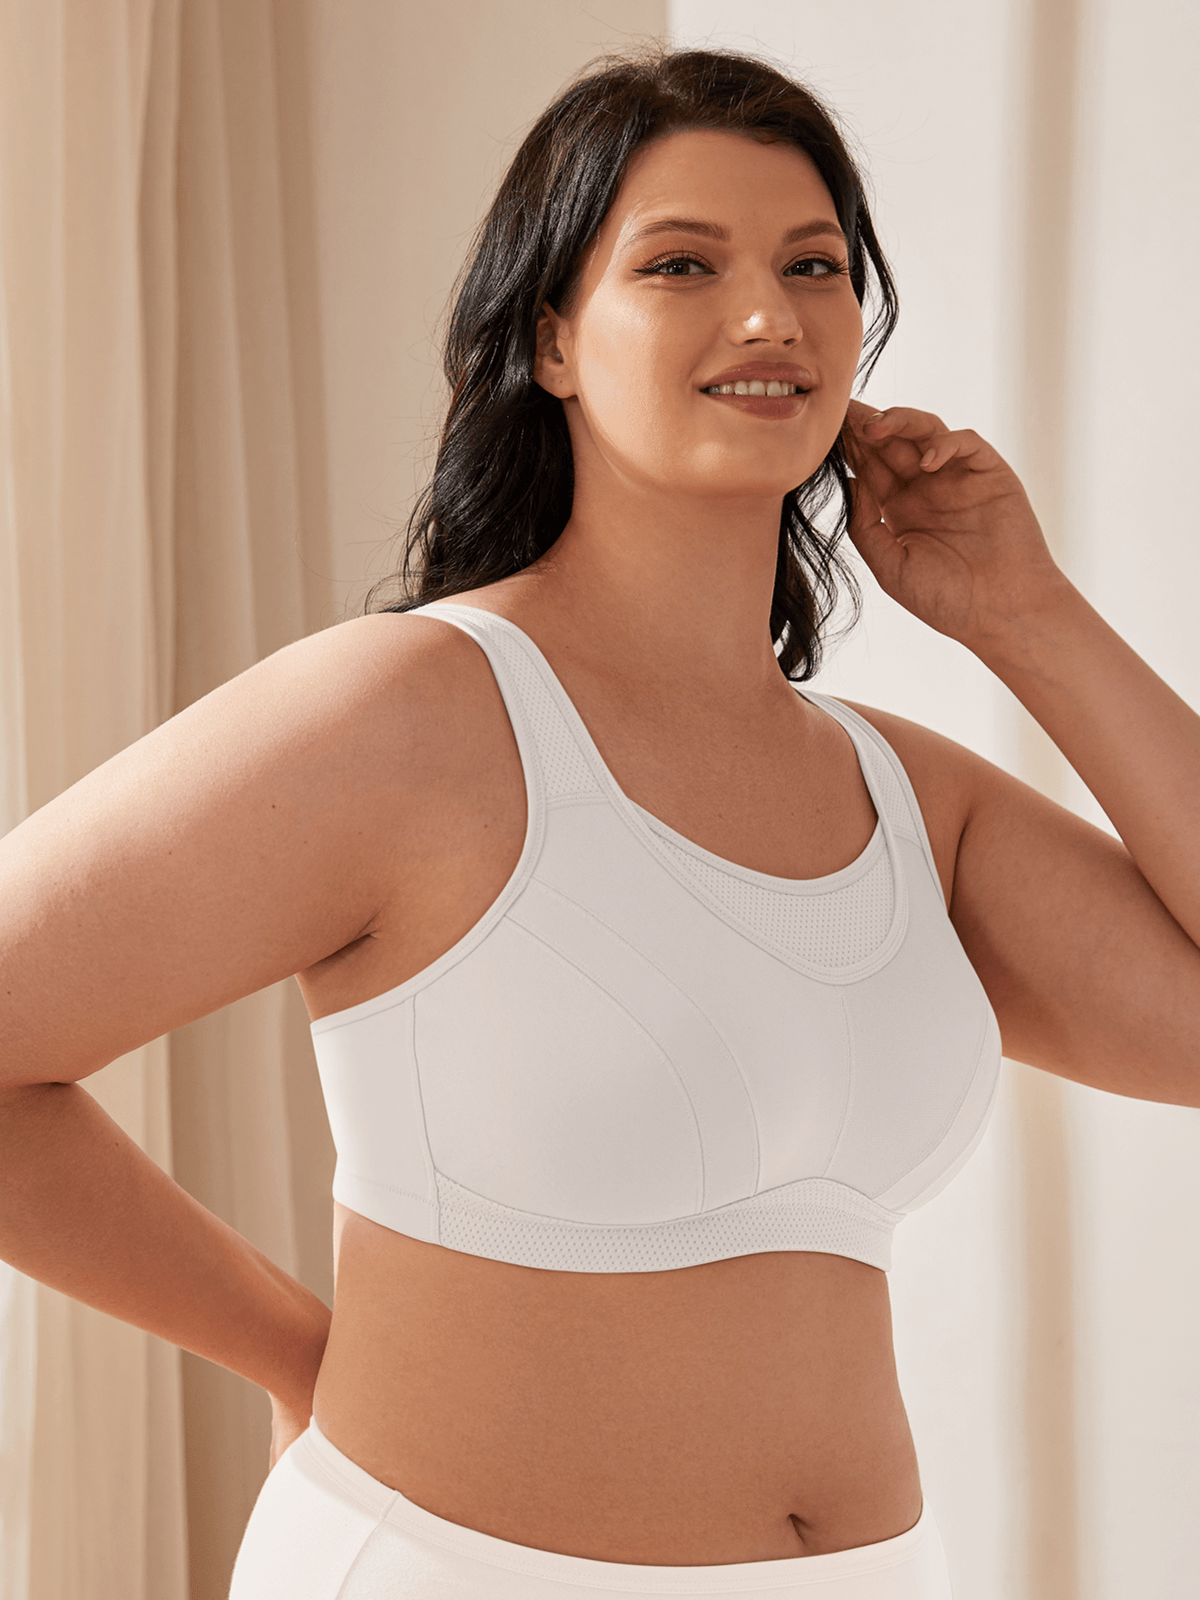 Plus Size Sports Bra for Women - Easy Access Lingerie Nude Strapless Dance  Bra Lace Sports Bra Sets Sport Bra Removable Pad Gym Top Women Crop Support  Bras for Large Breasts 